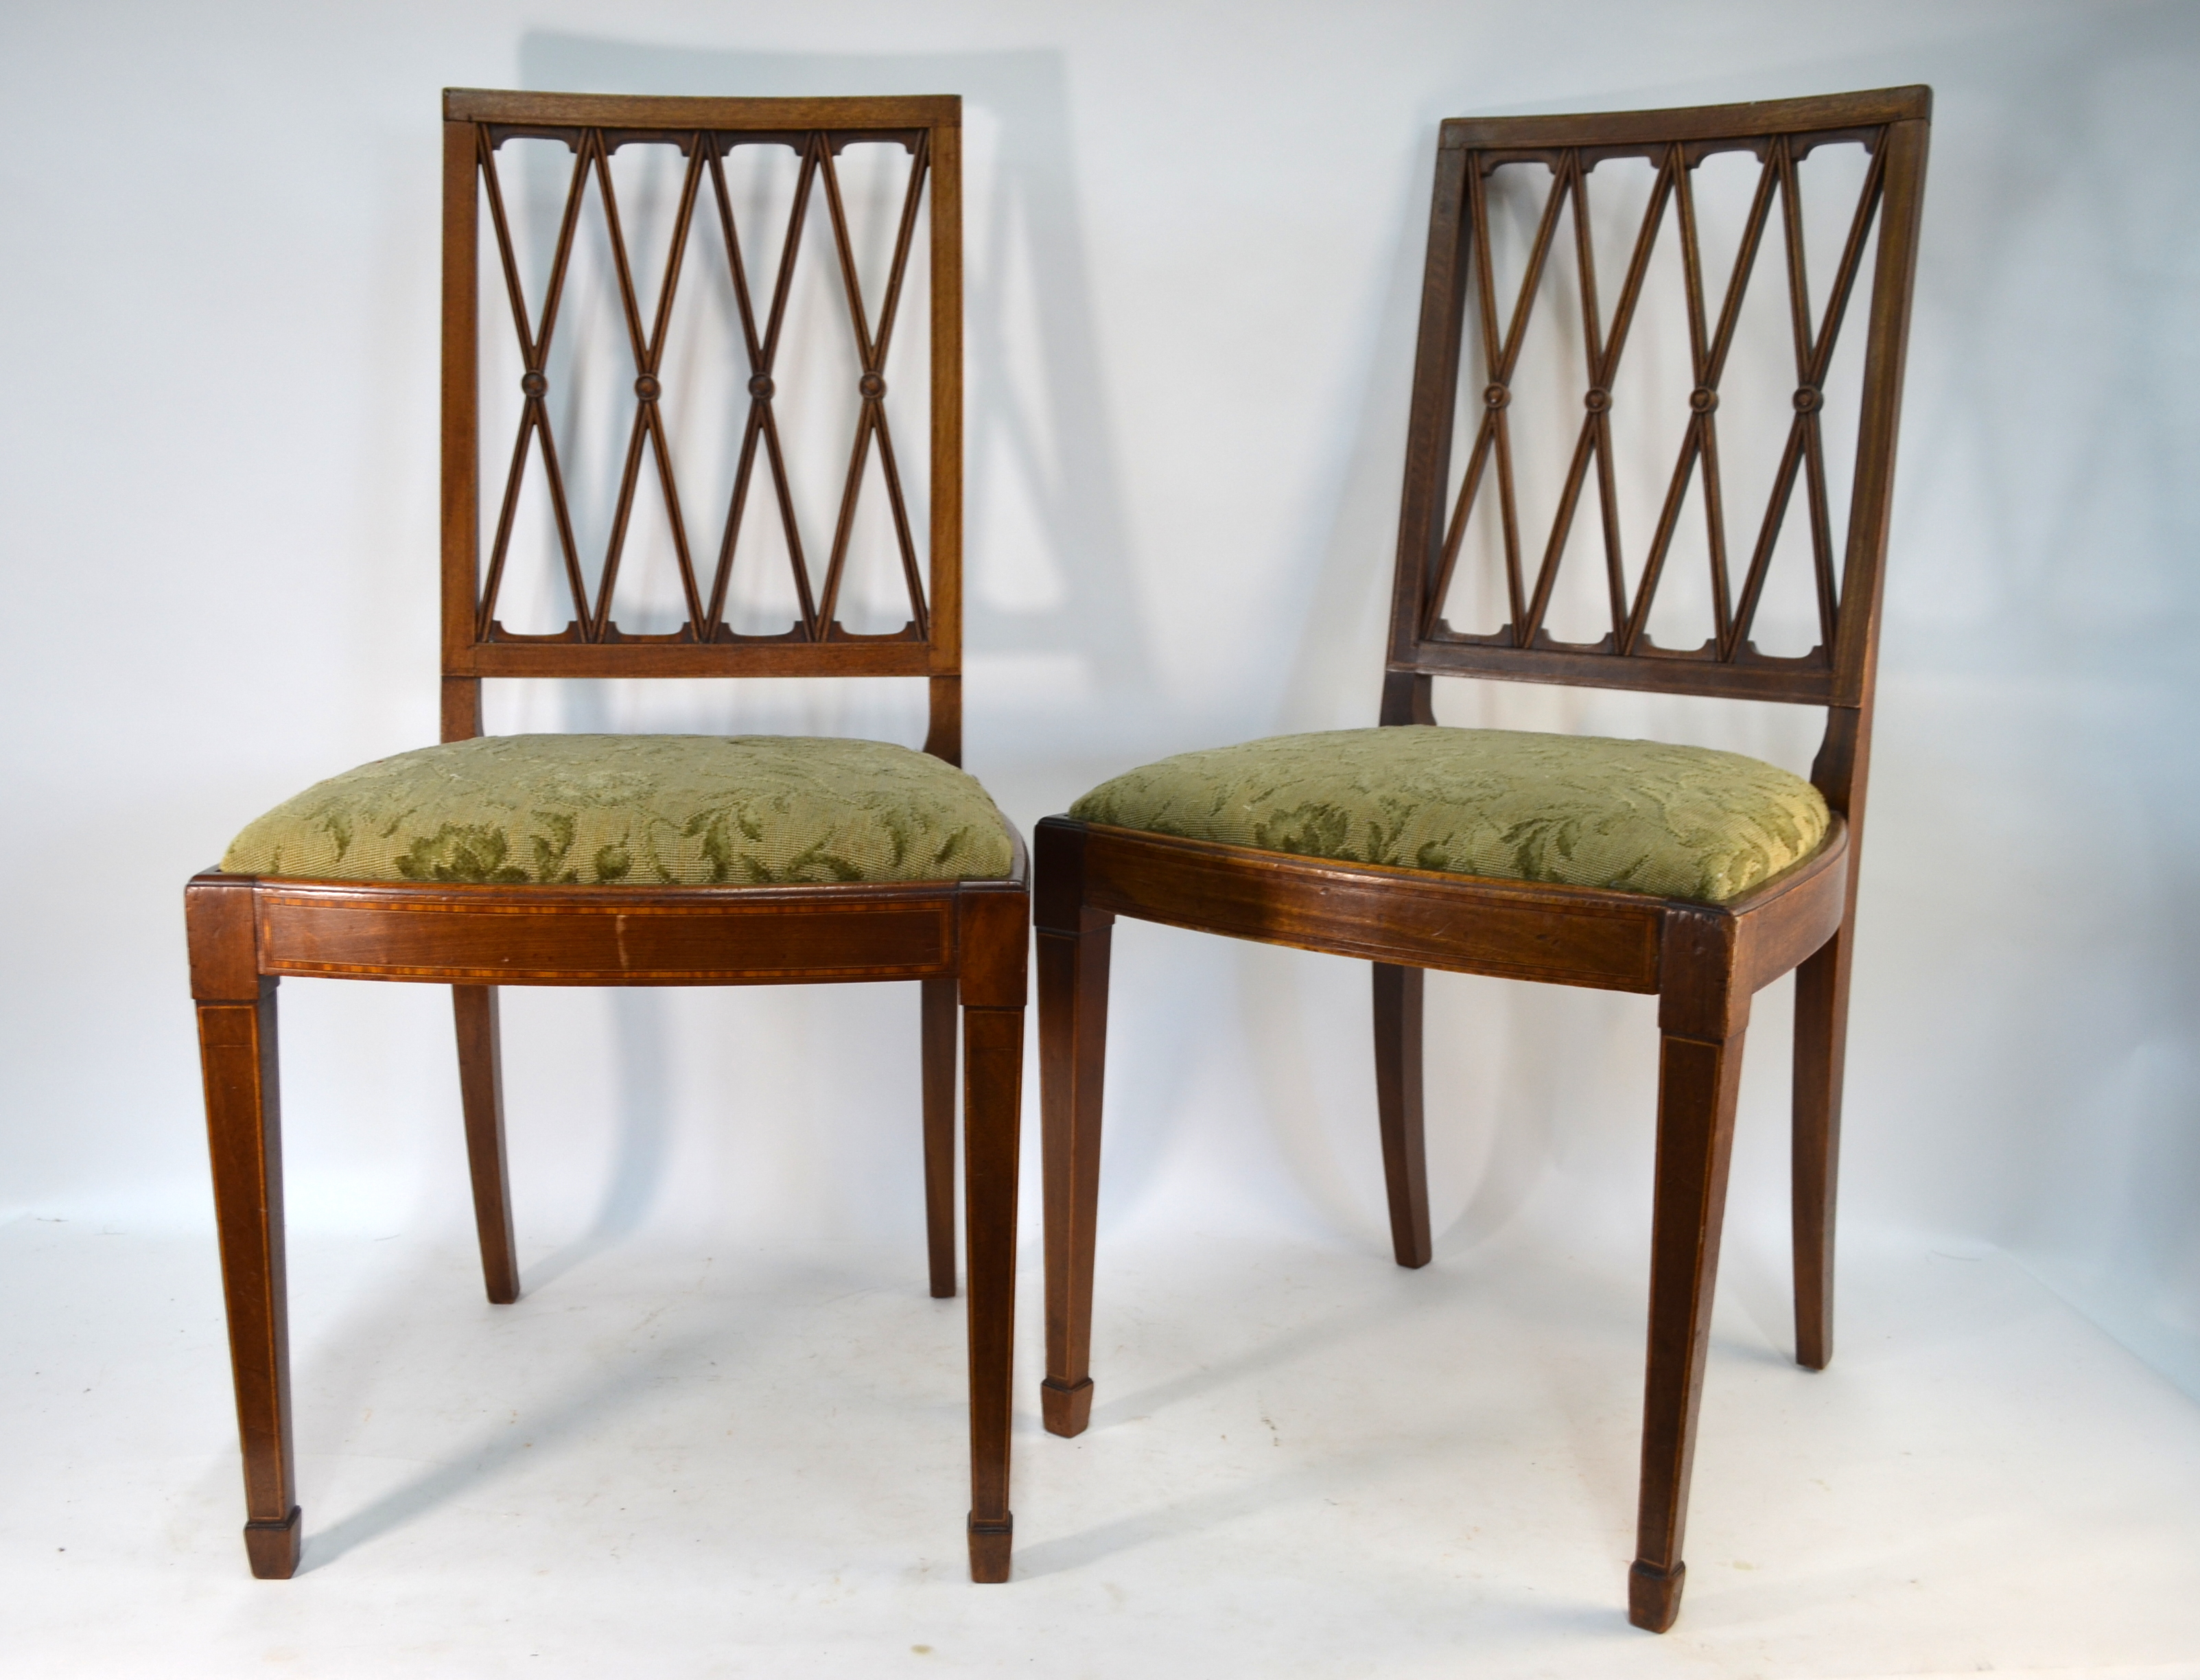 A set of six 19th century inlaid mahogany dining chairs with moulded lattice splats, bearing '